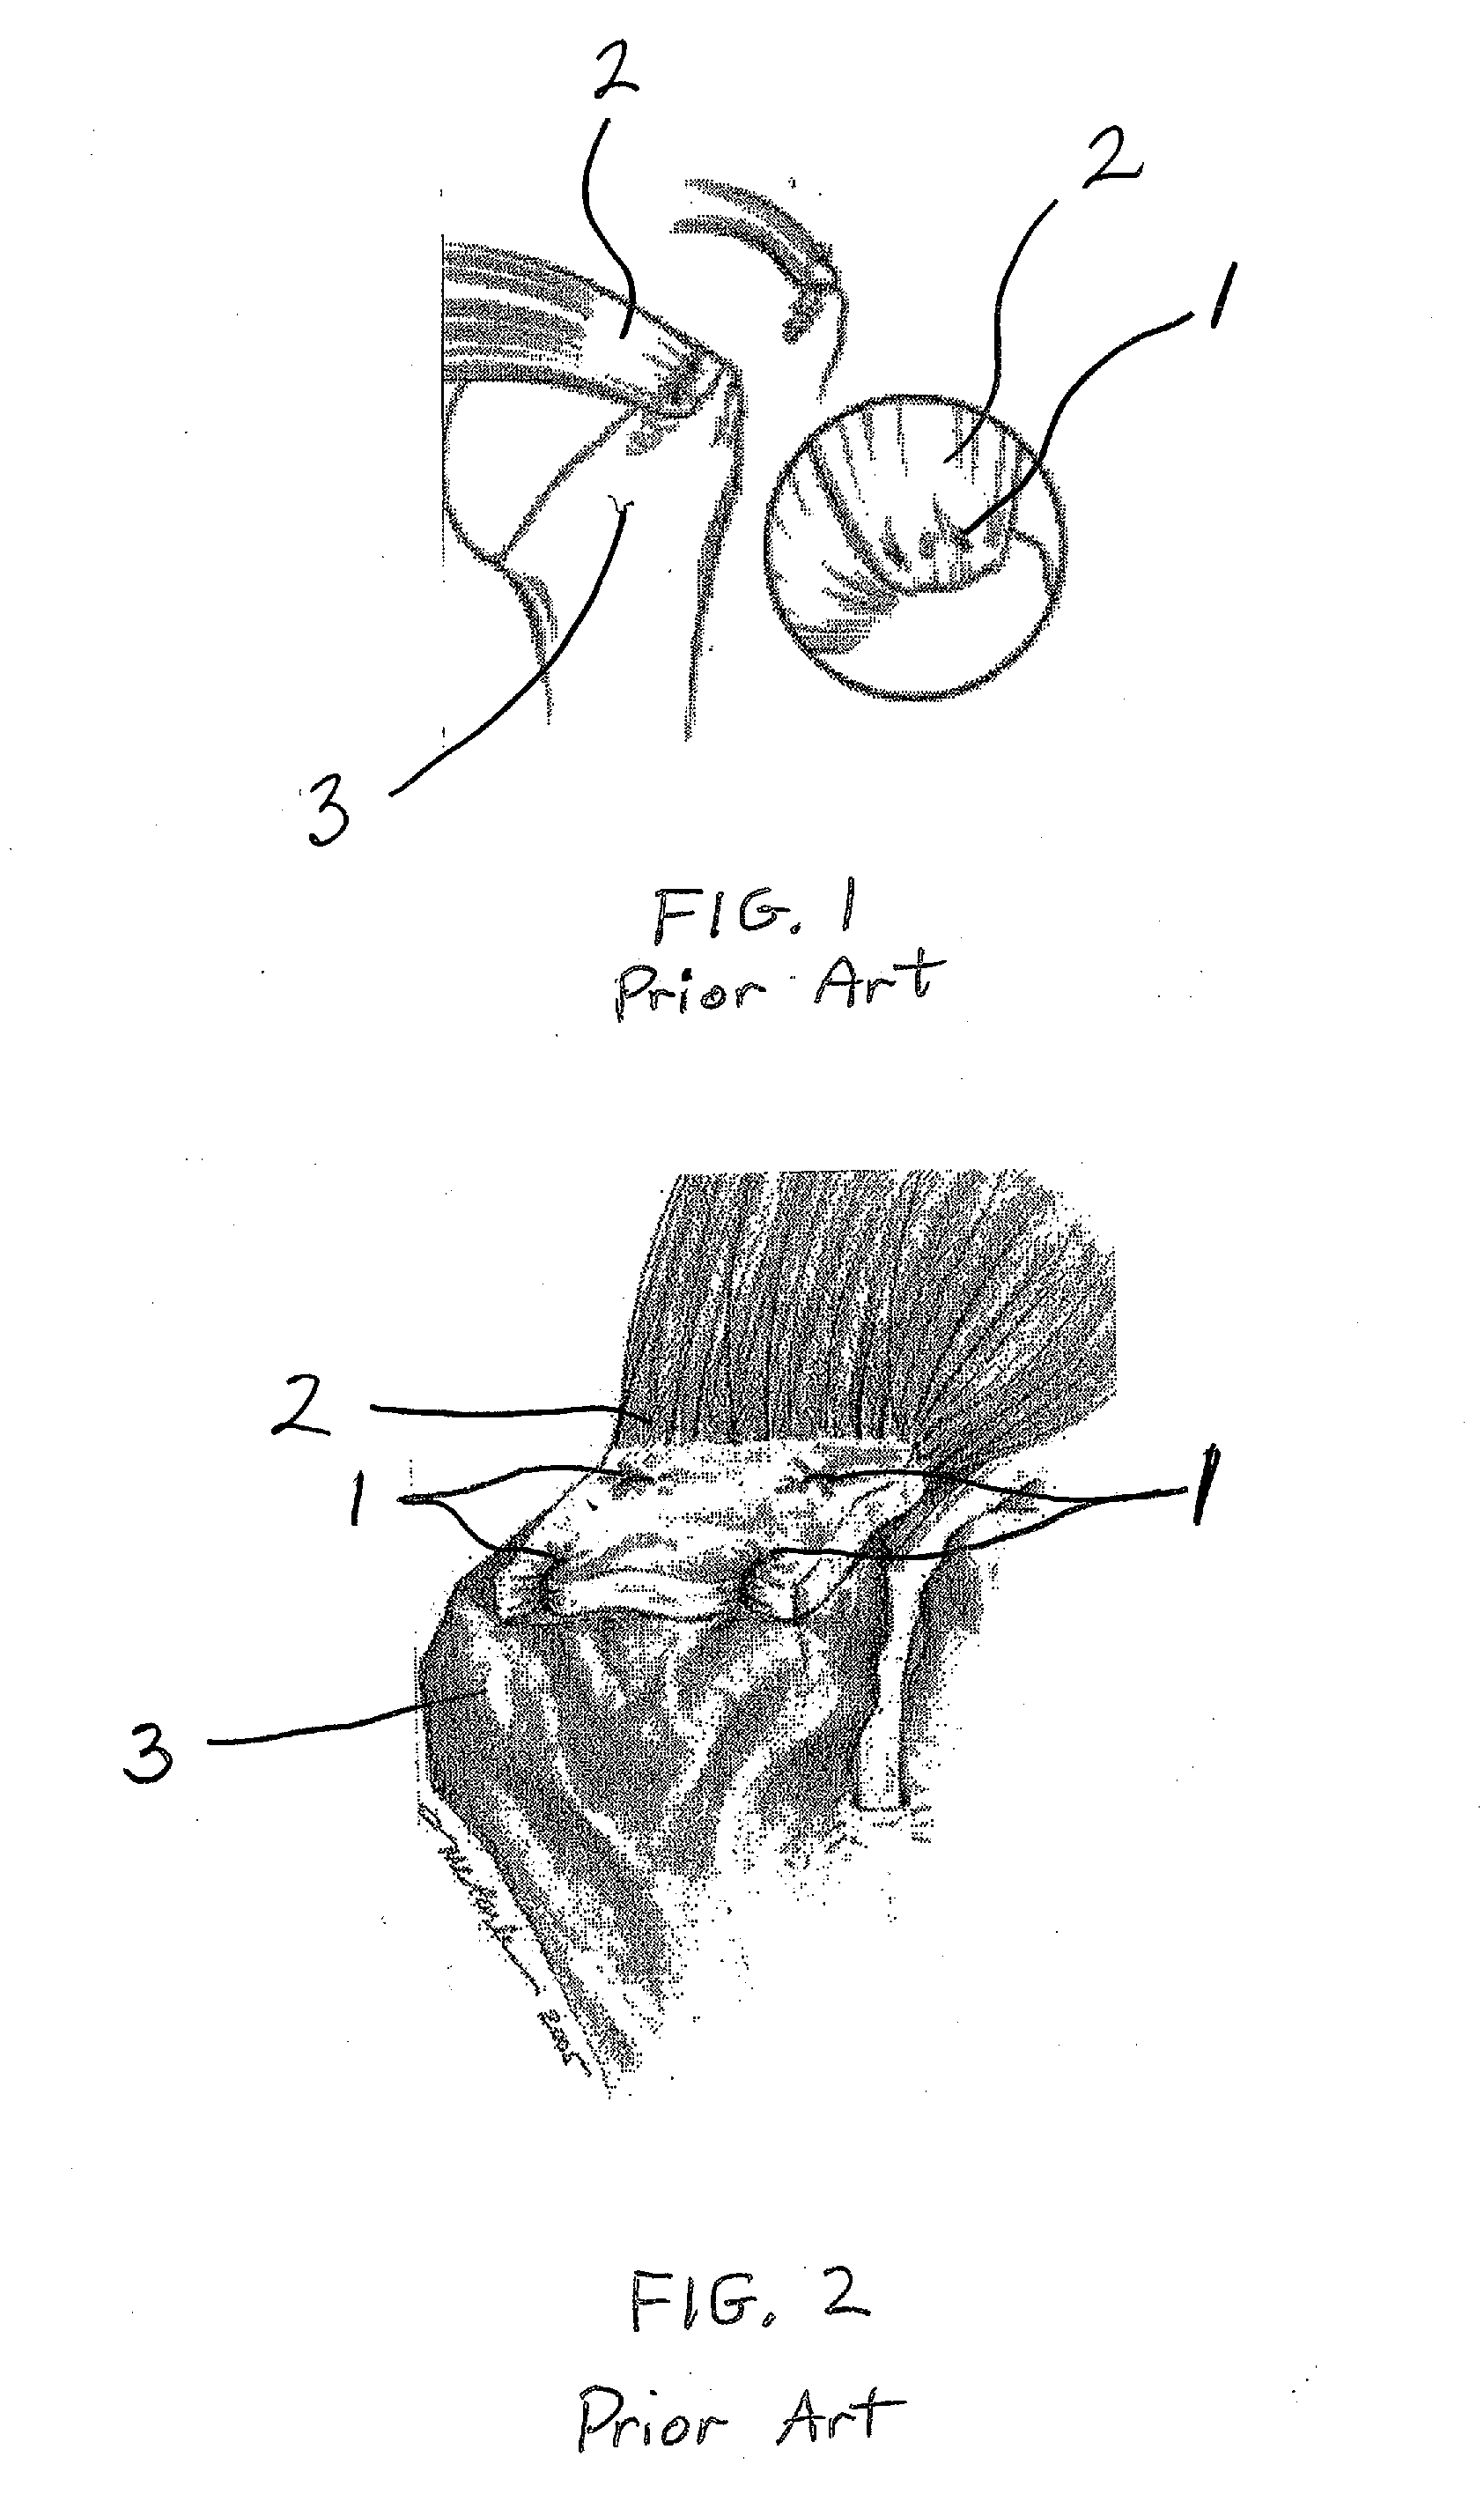 Systems and methods for repairing soft tissues using nanofiber material